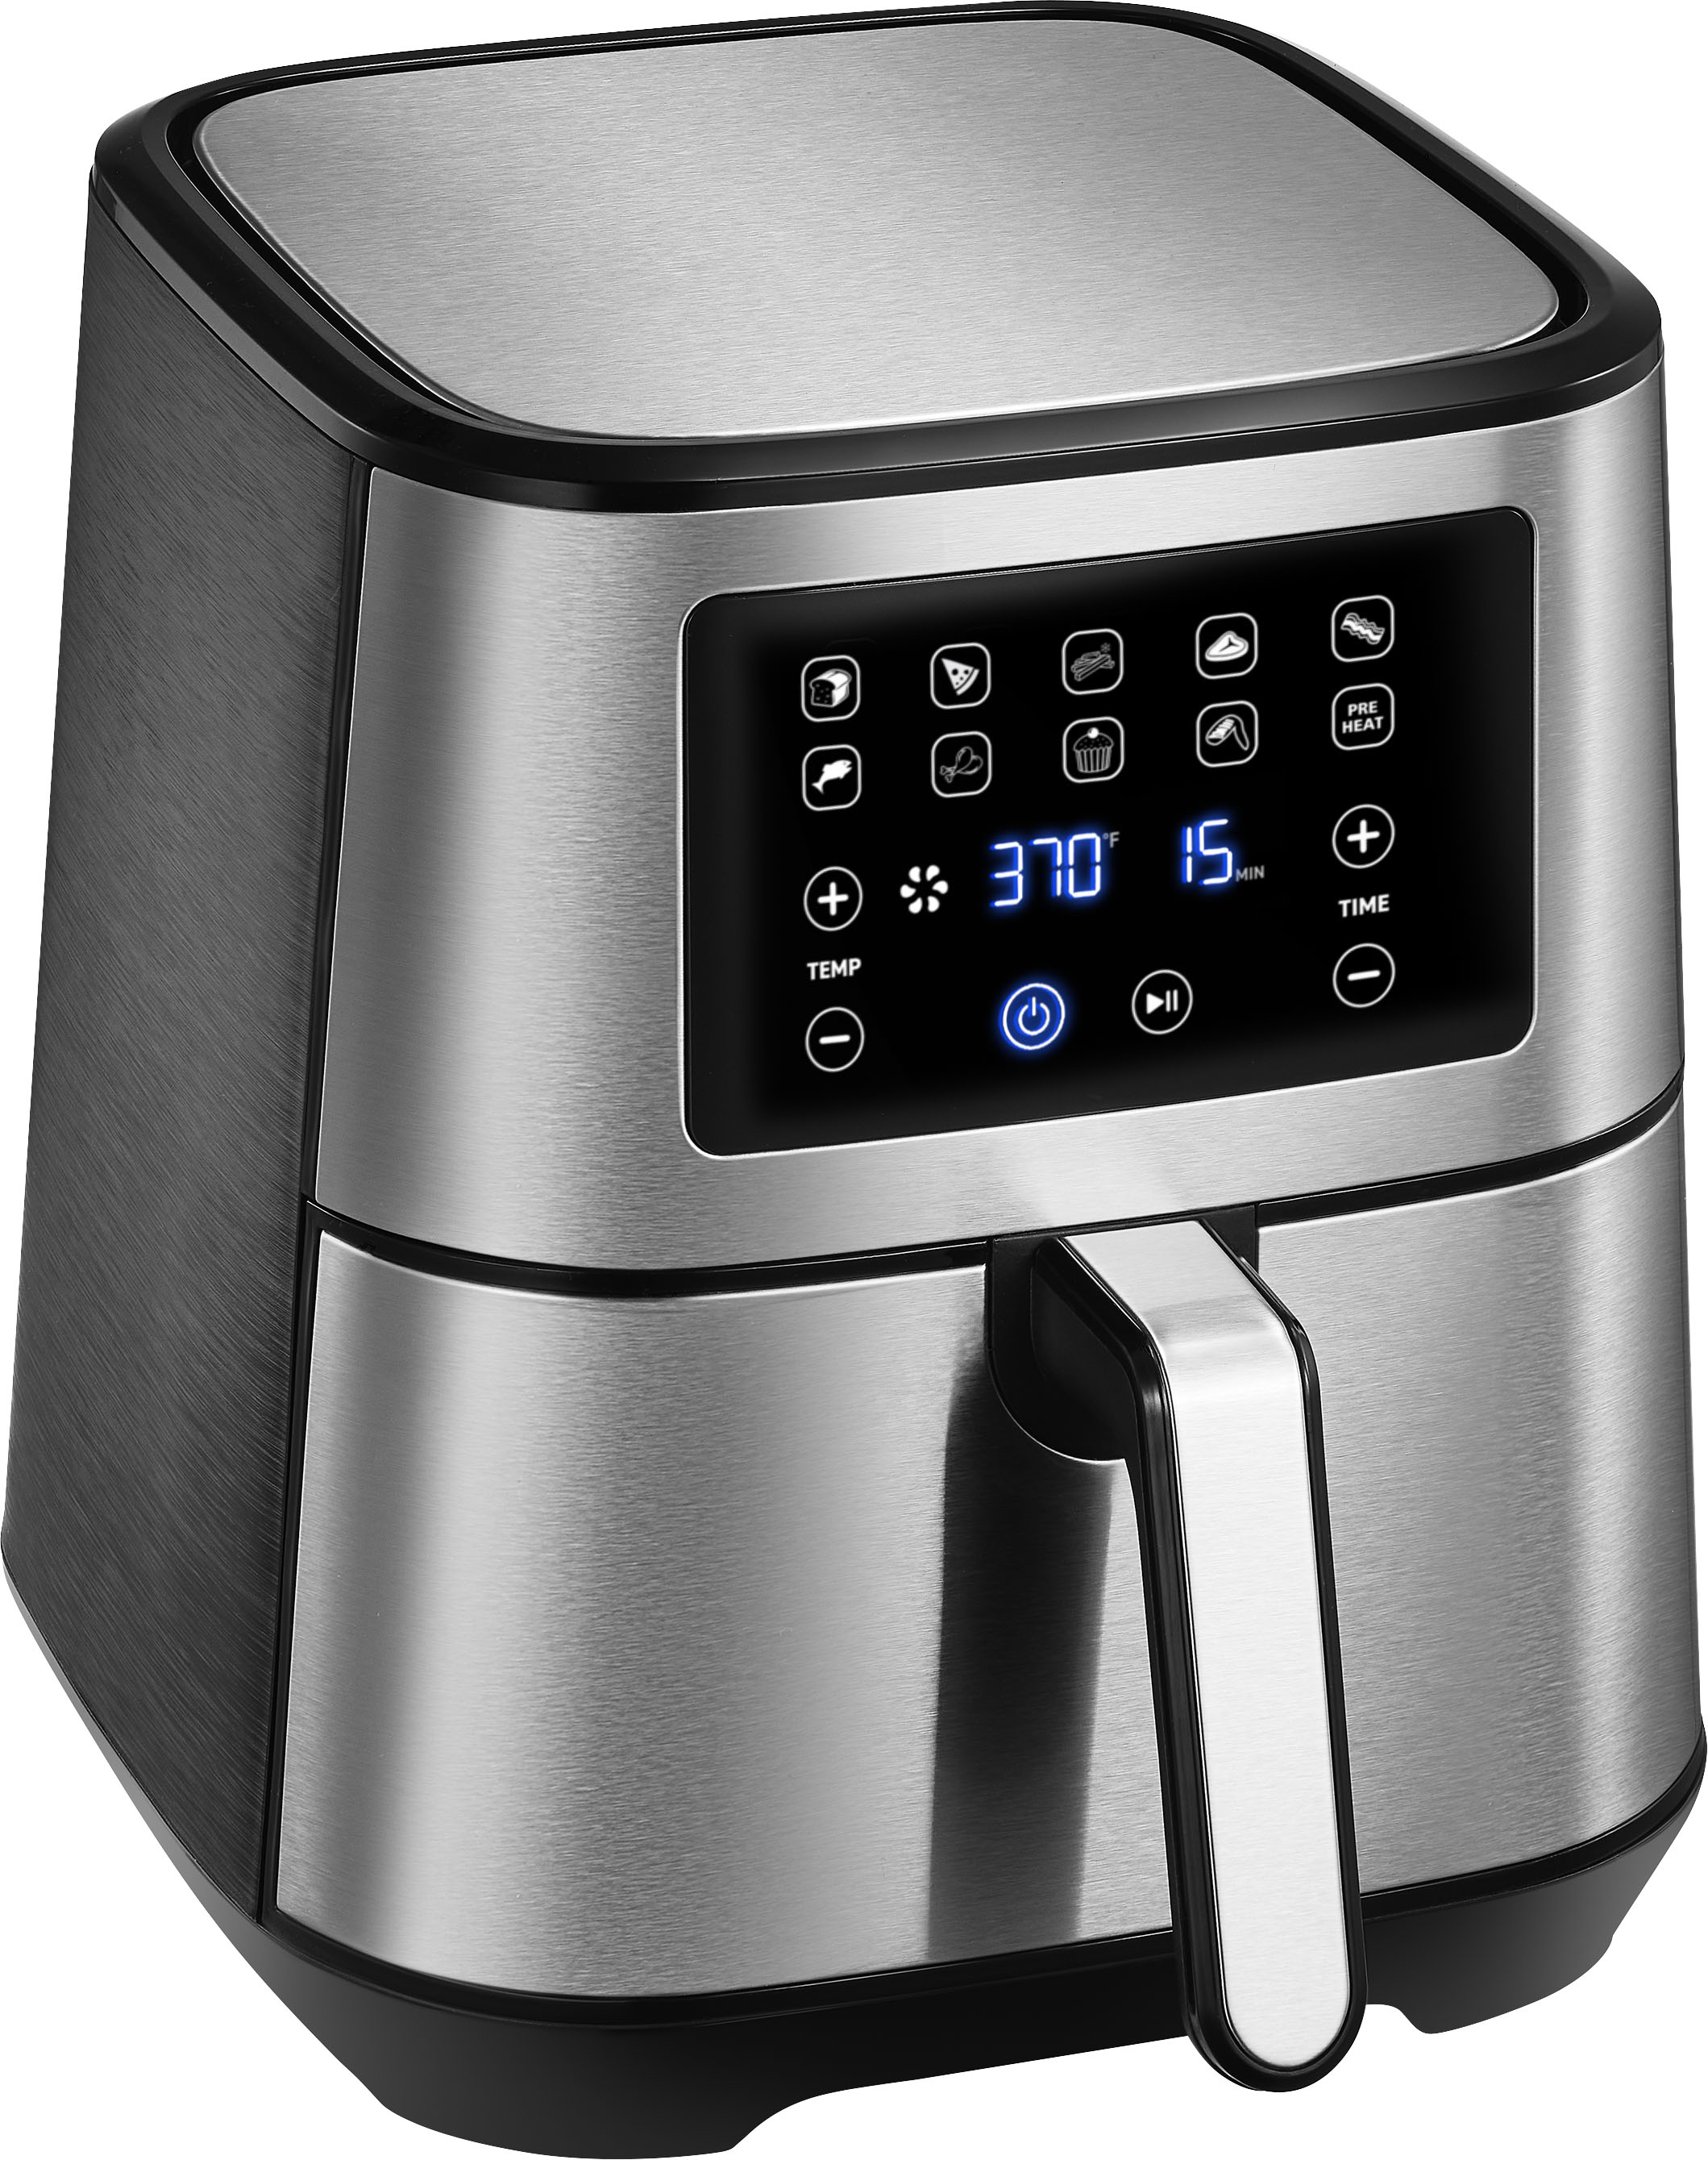 Insignia™ 8qt Digital Multi Cooker Stainless Steel NS  - Best Buy